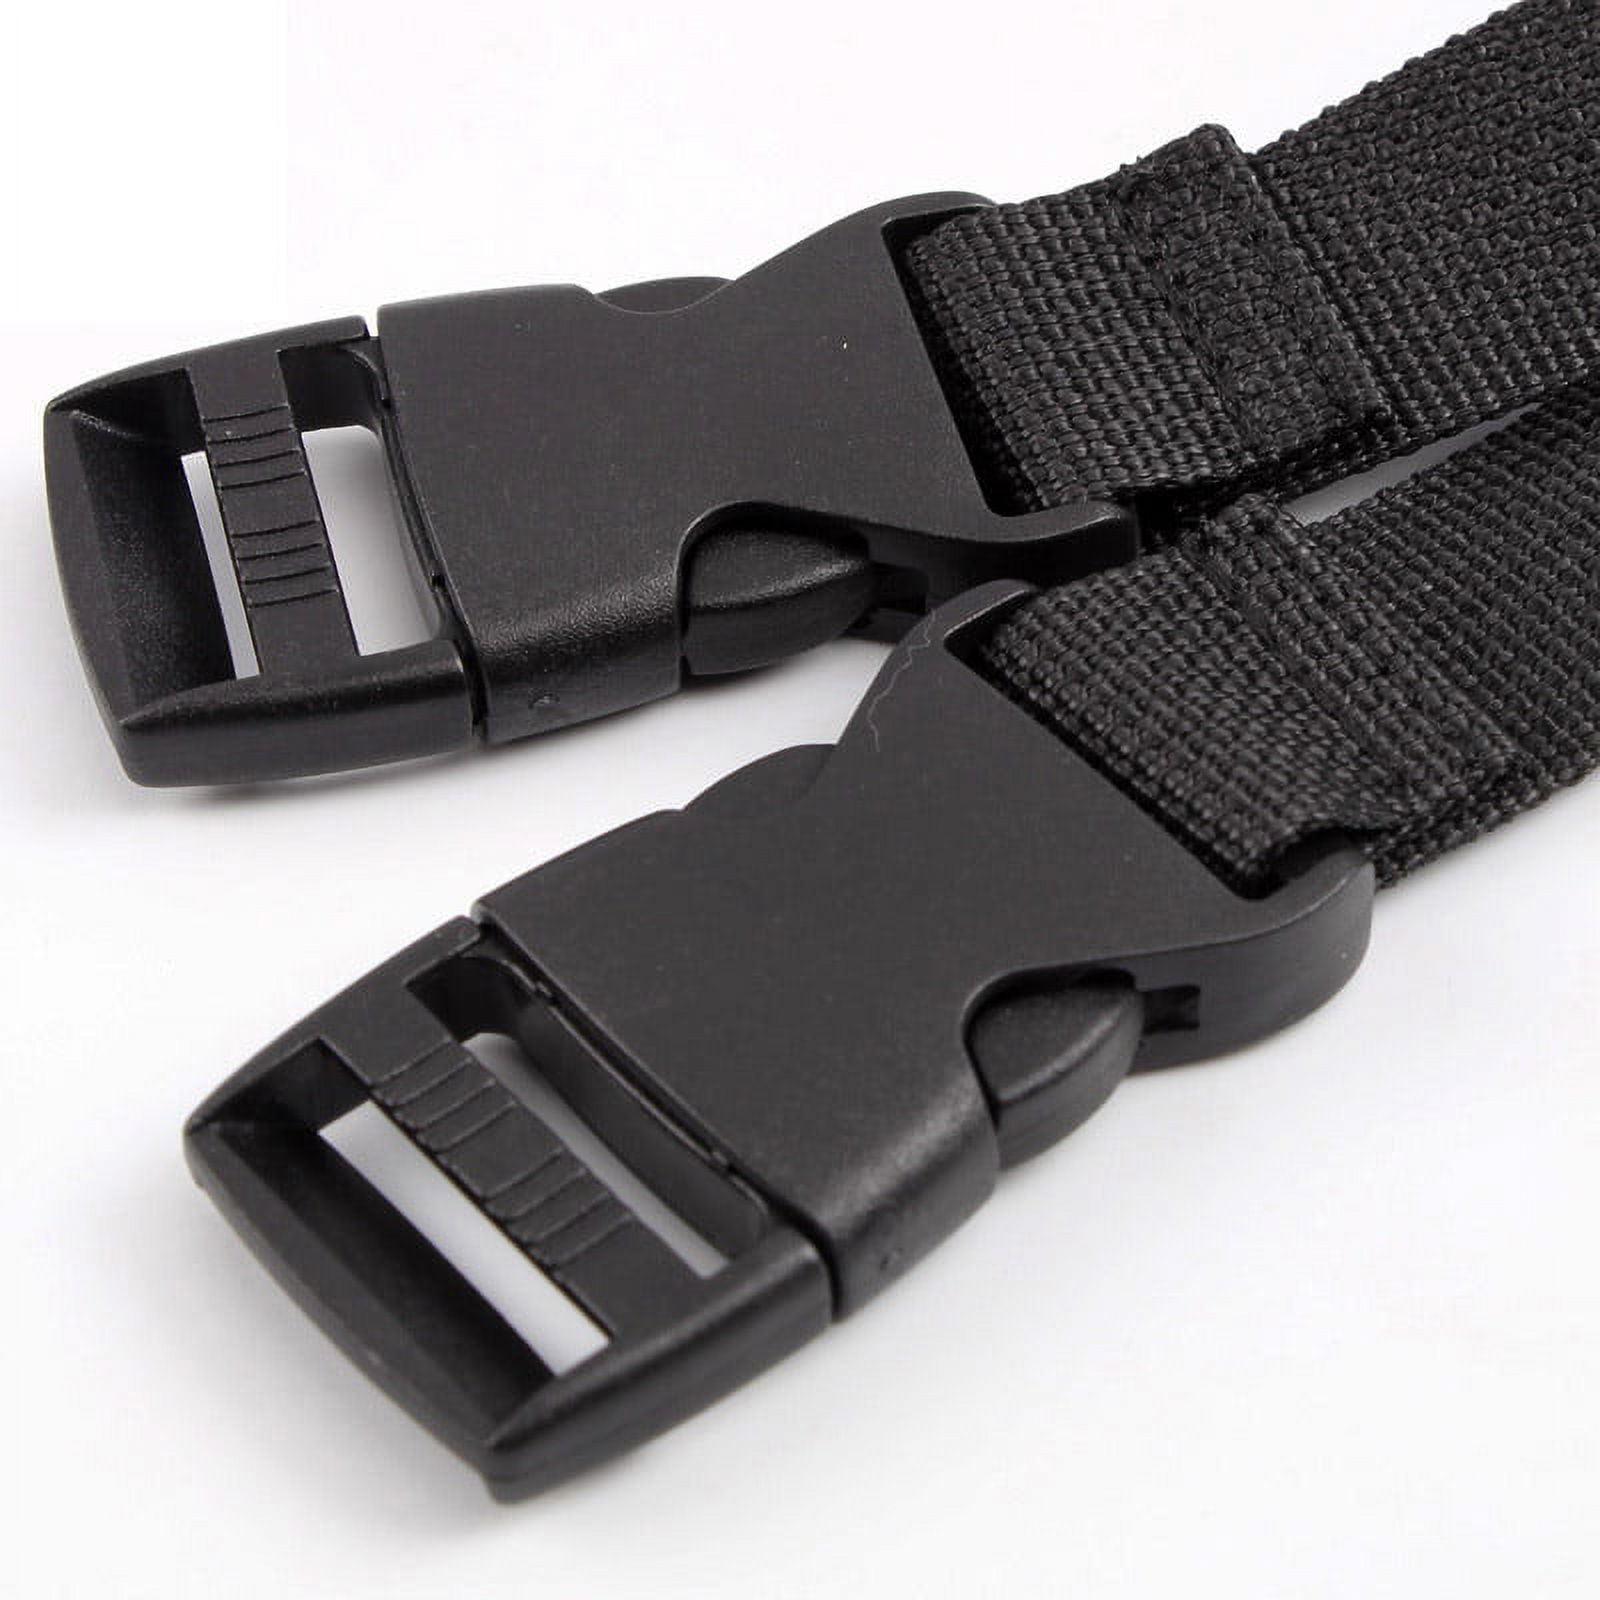 2Pcs Adjustable Nylon Bind Band Strap Utility Strap with Quick